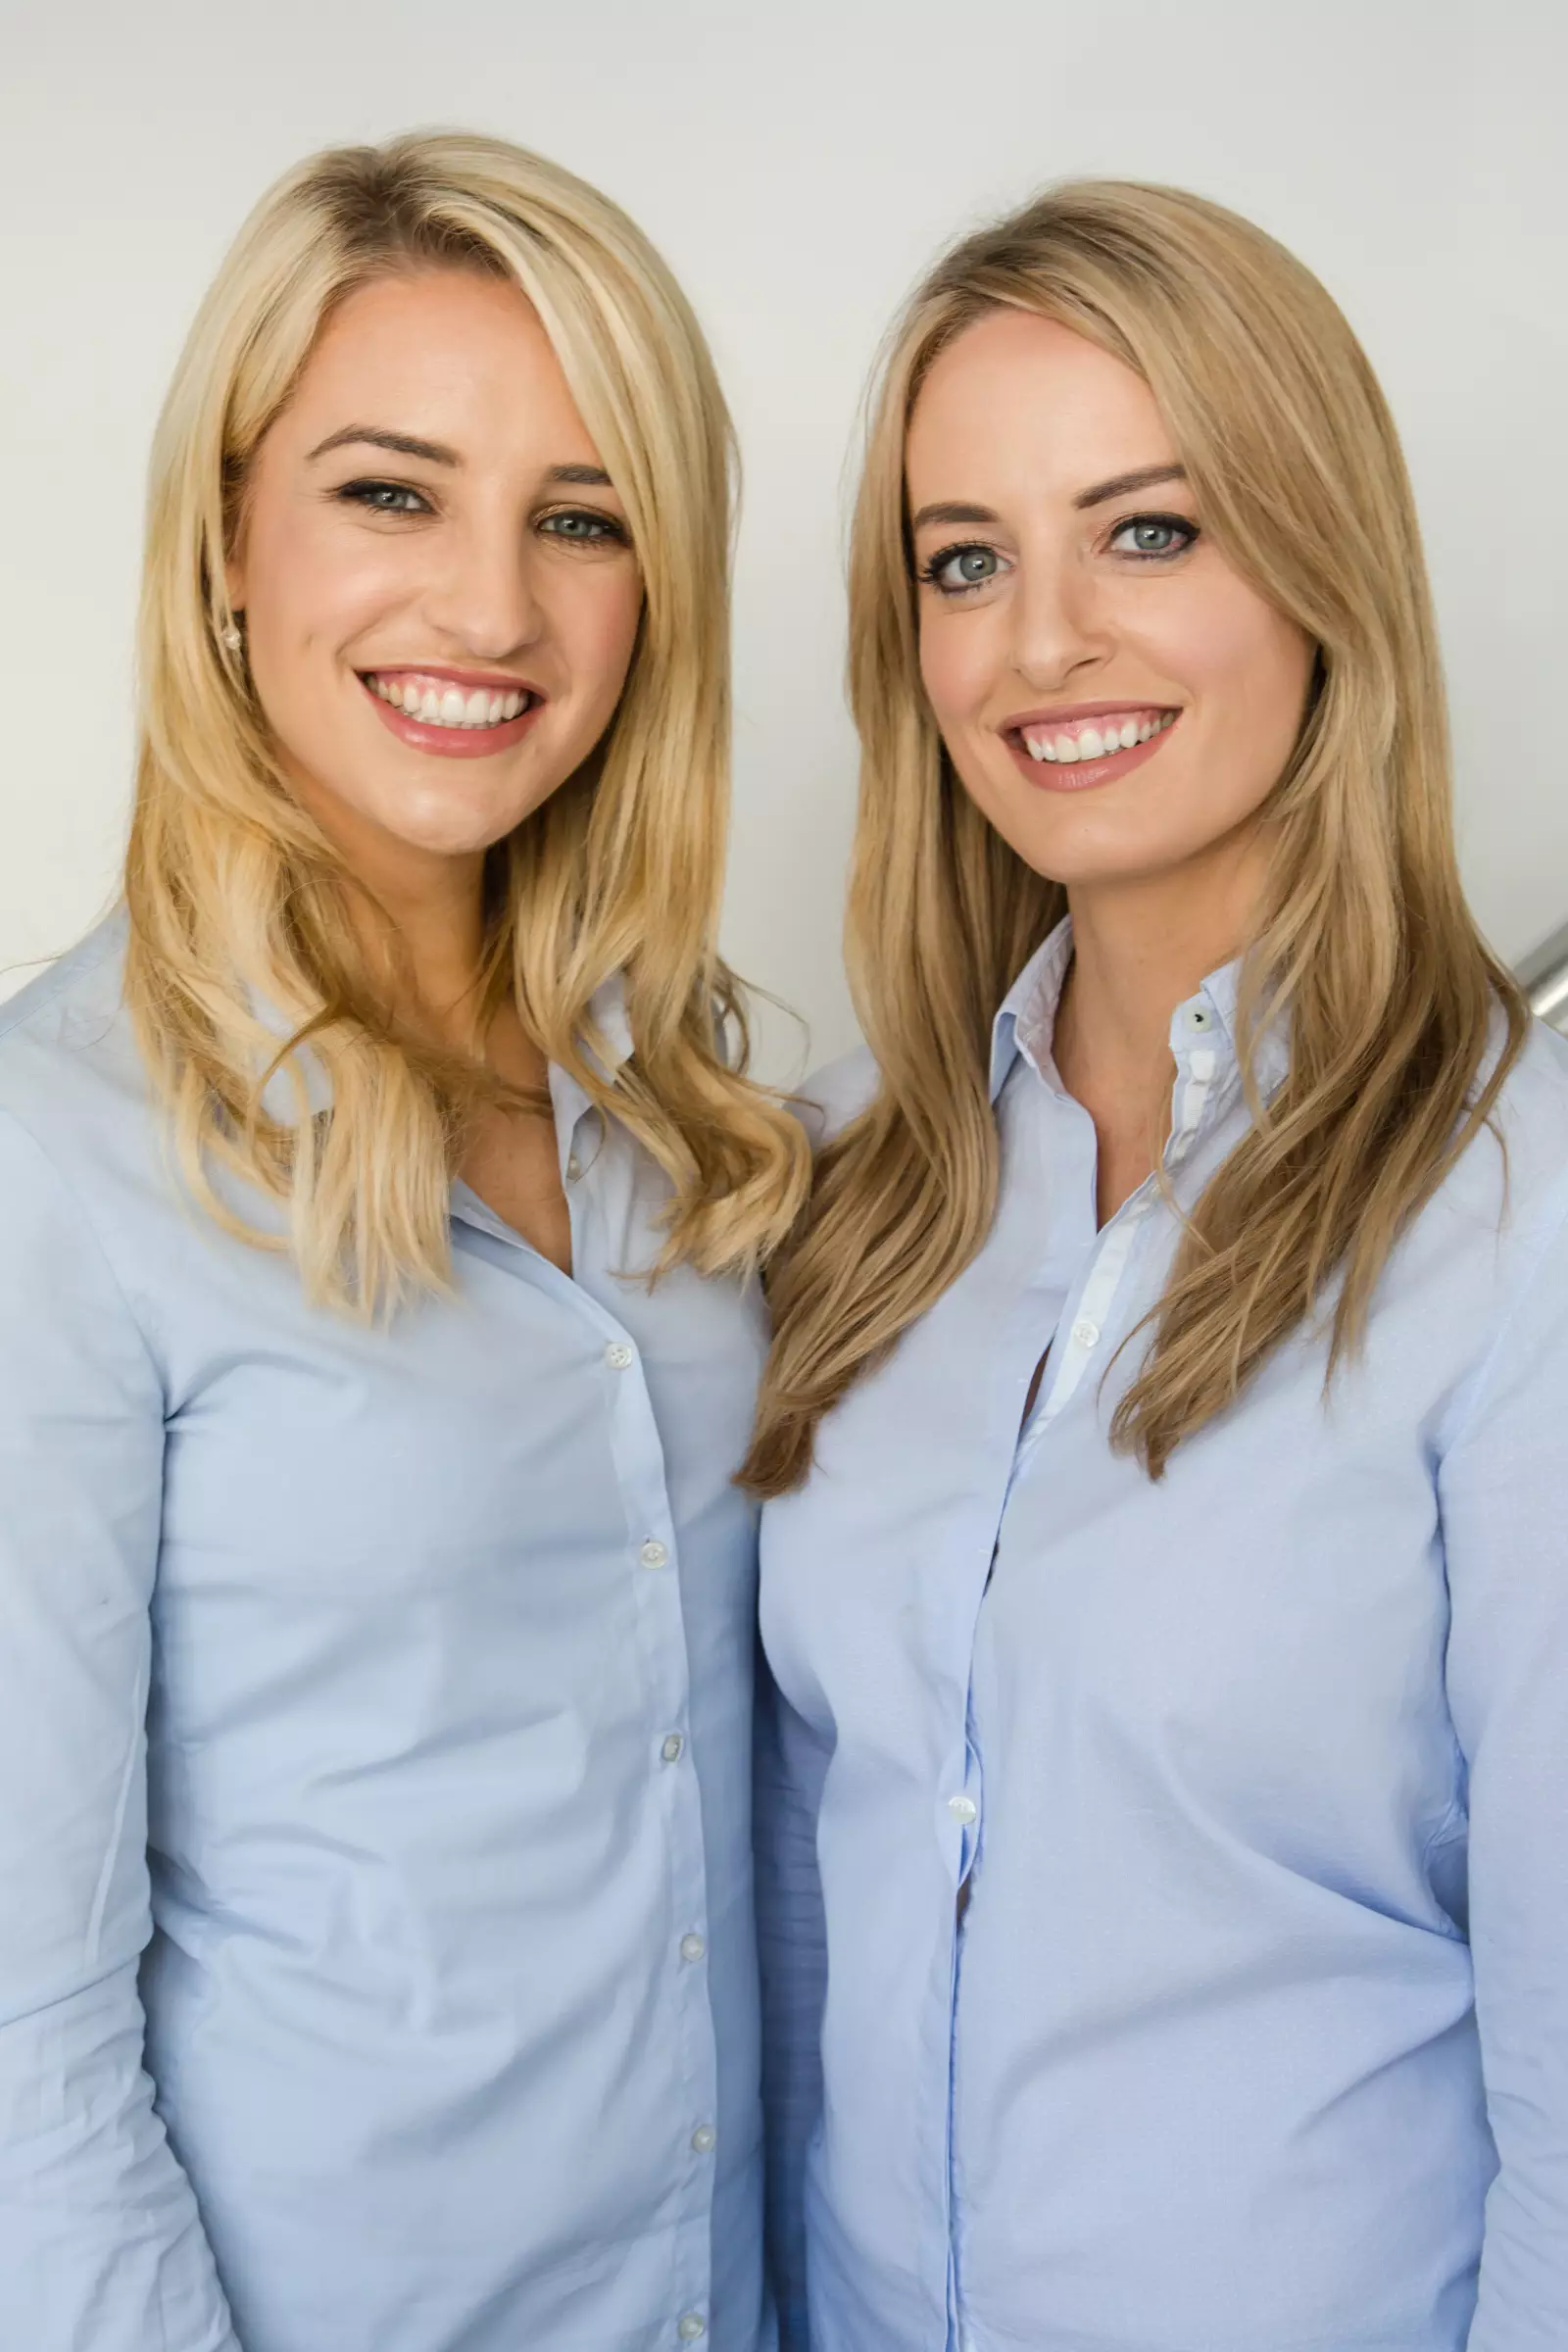 Irish dentists Dr Vanessa and Lisa Creaven created the product originally for their patients.